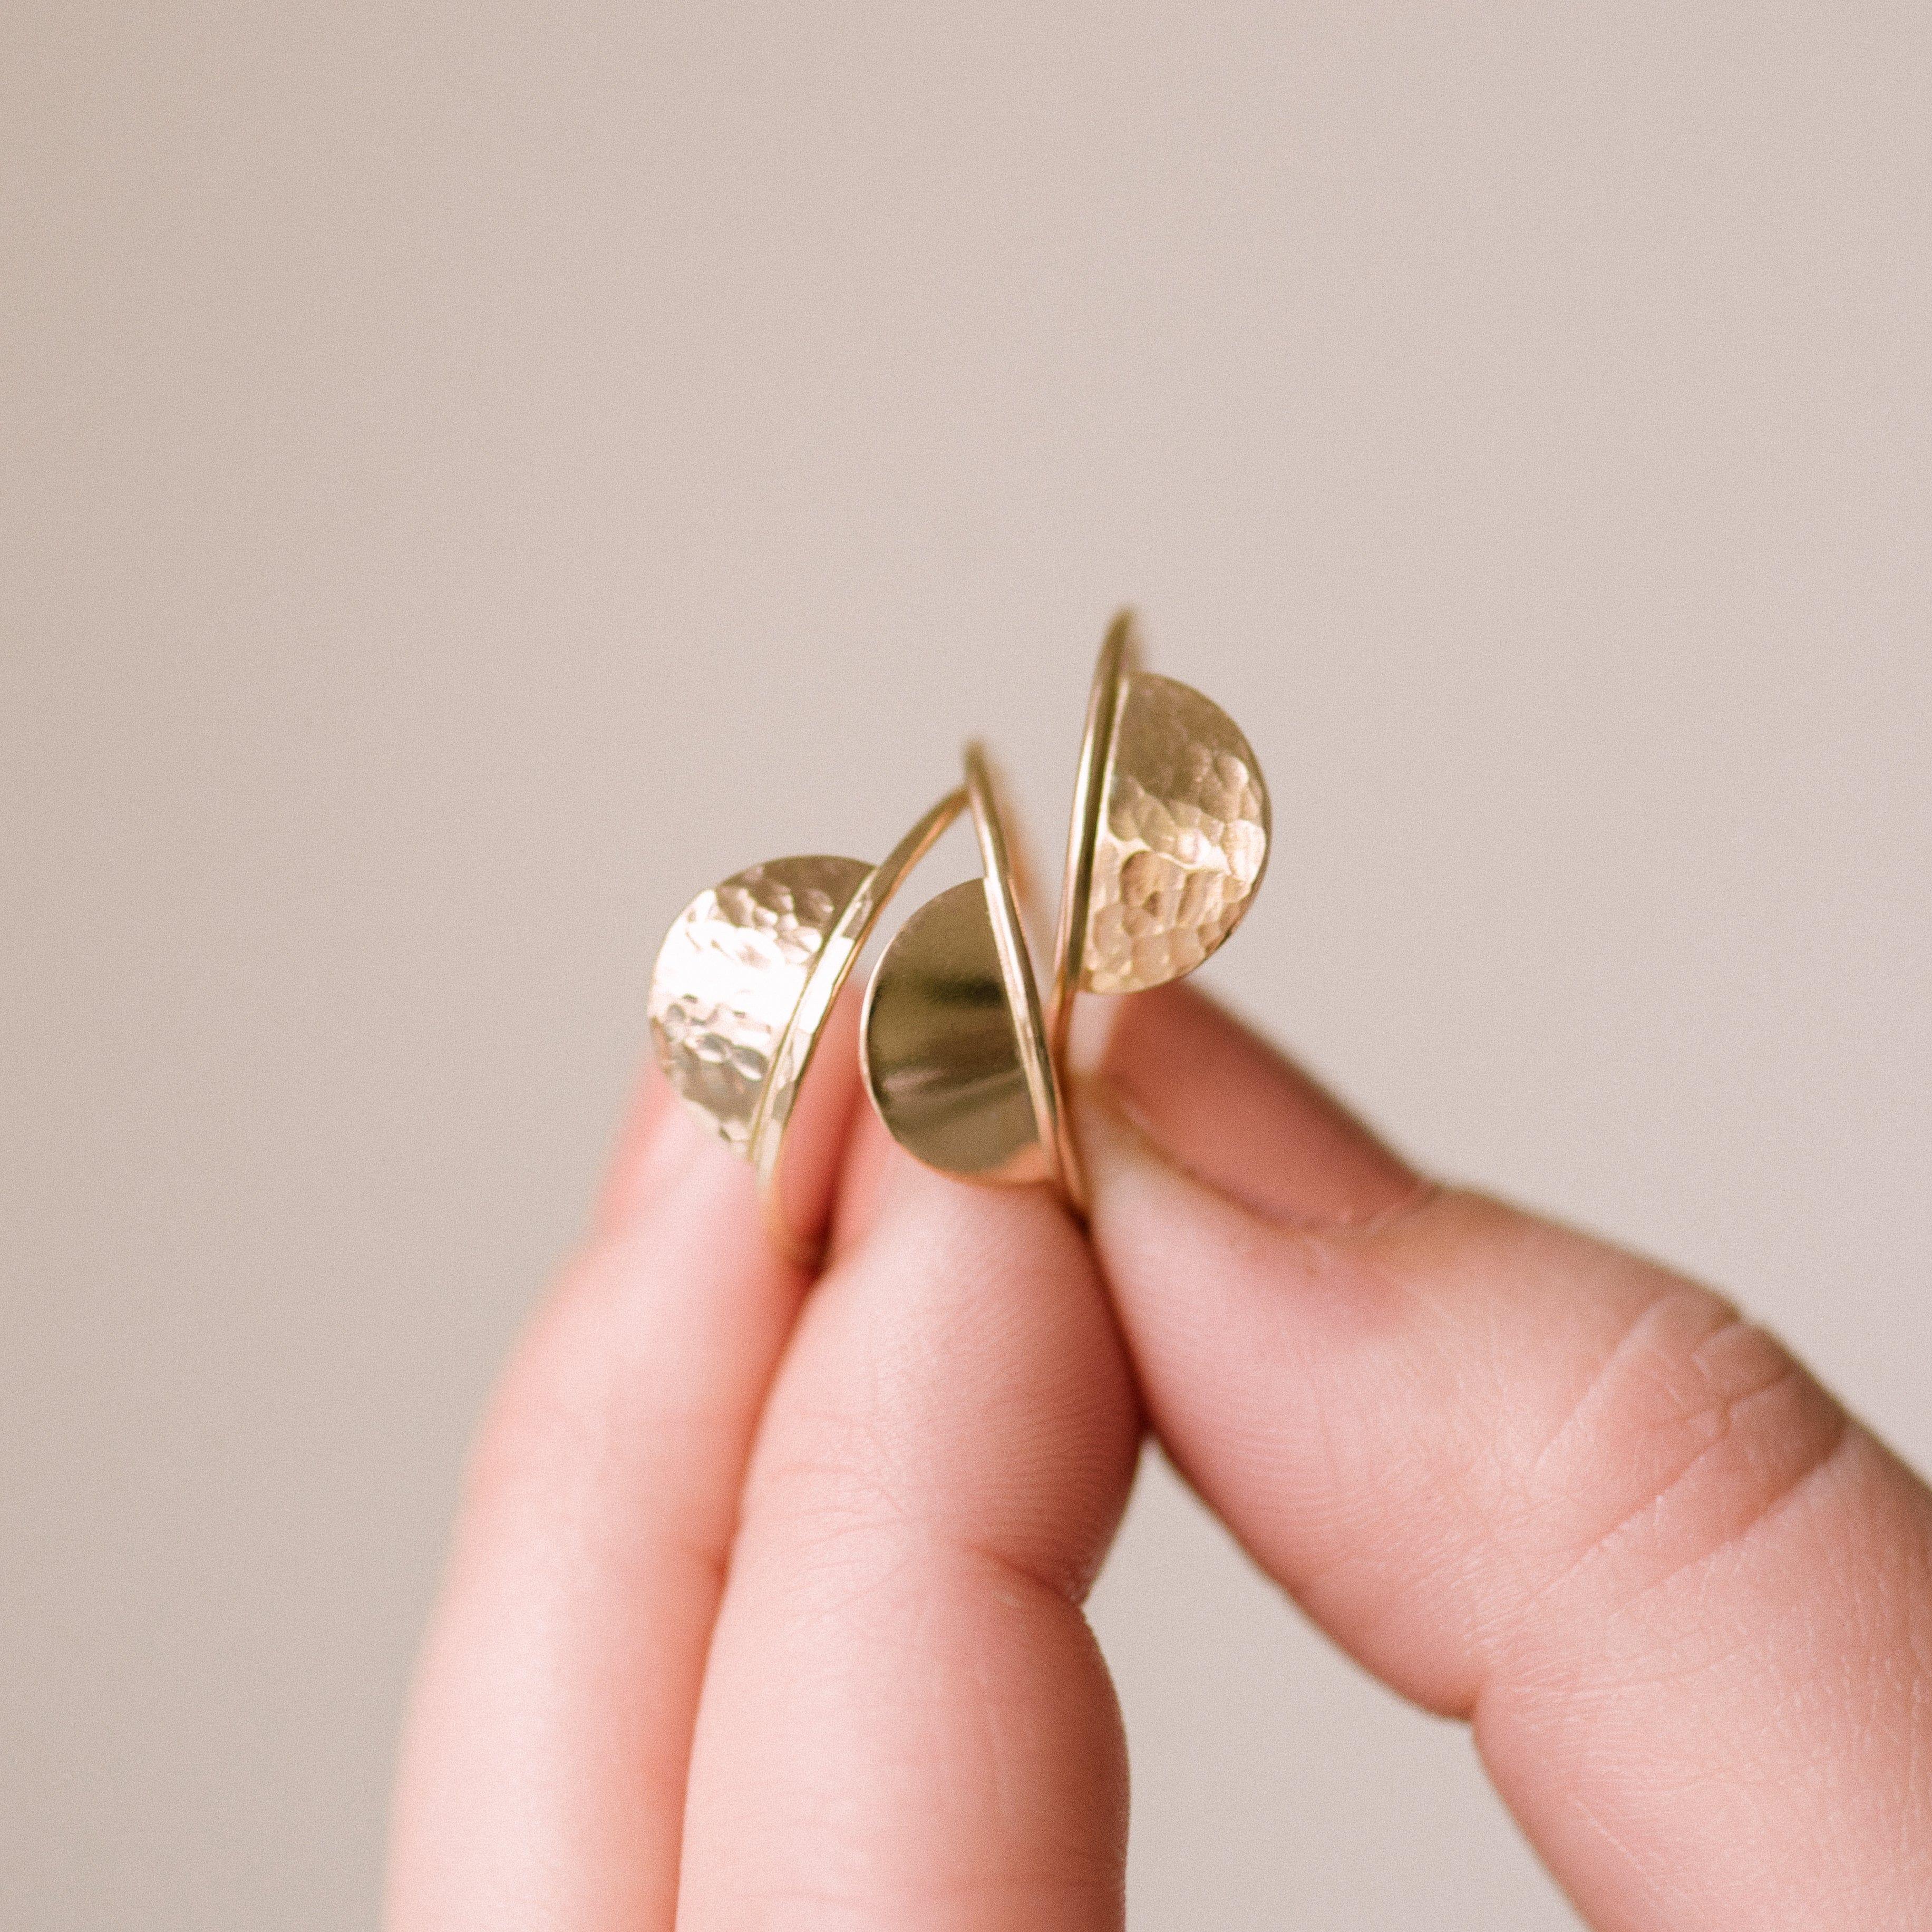 Half Moon Ring - Nolia Jewelry - Meaningful + Sustainably Handcrafted Jewelry